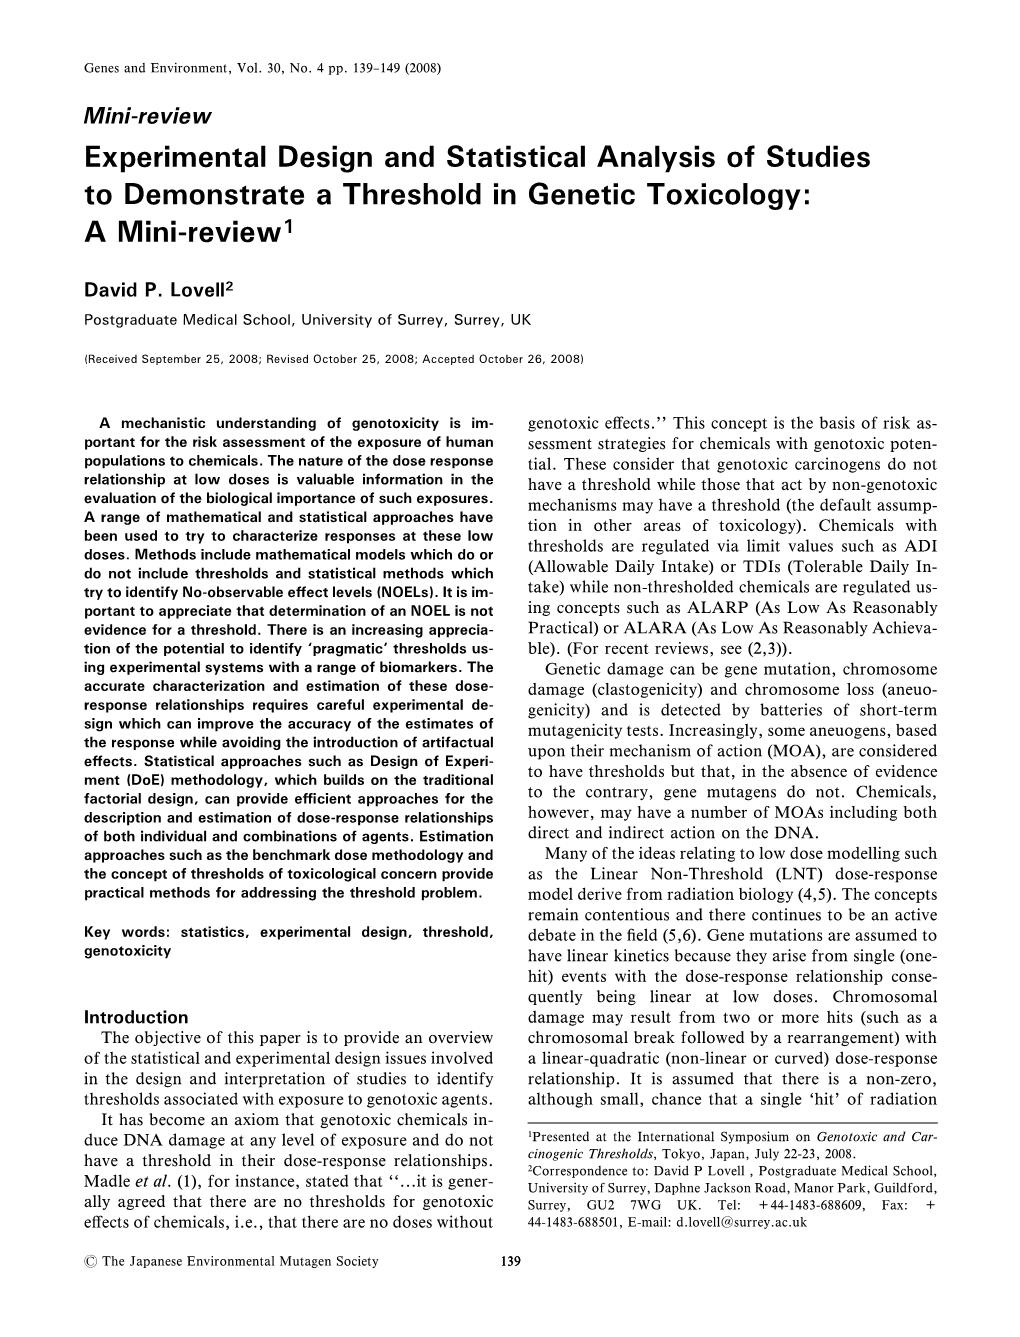 Experimental Design and Statistical Analysis of Studies to Demonstrate a Threshold in Genetic Toxicology: Amini-Review1